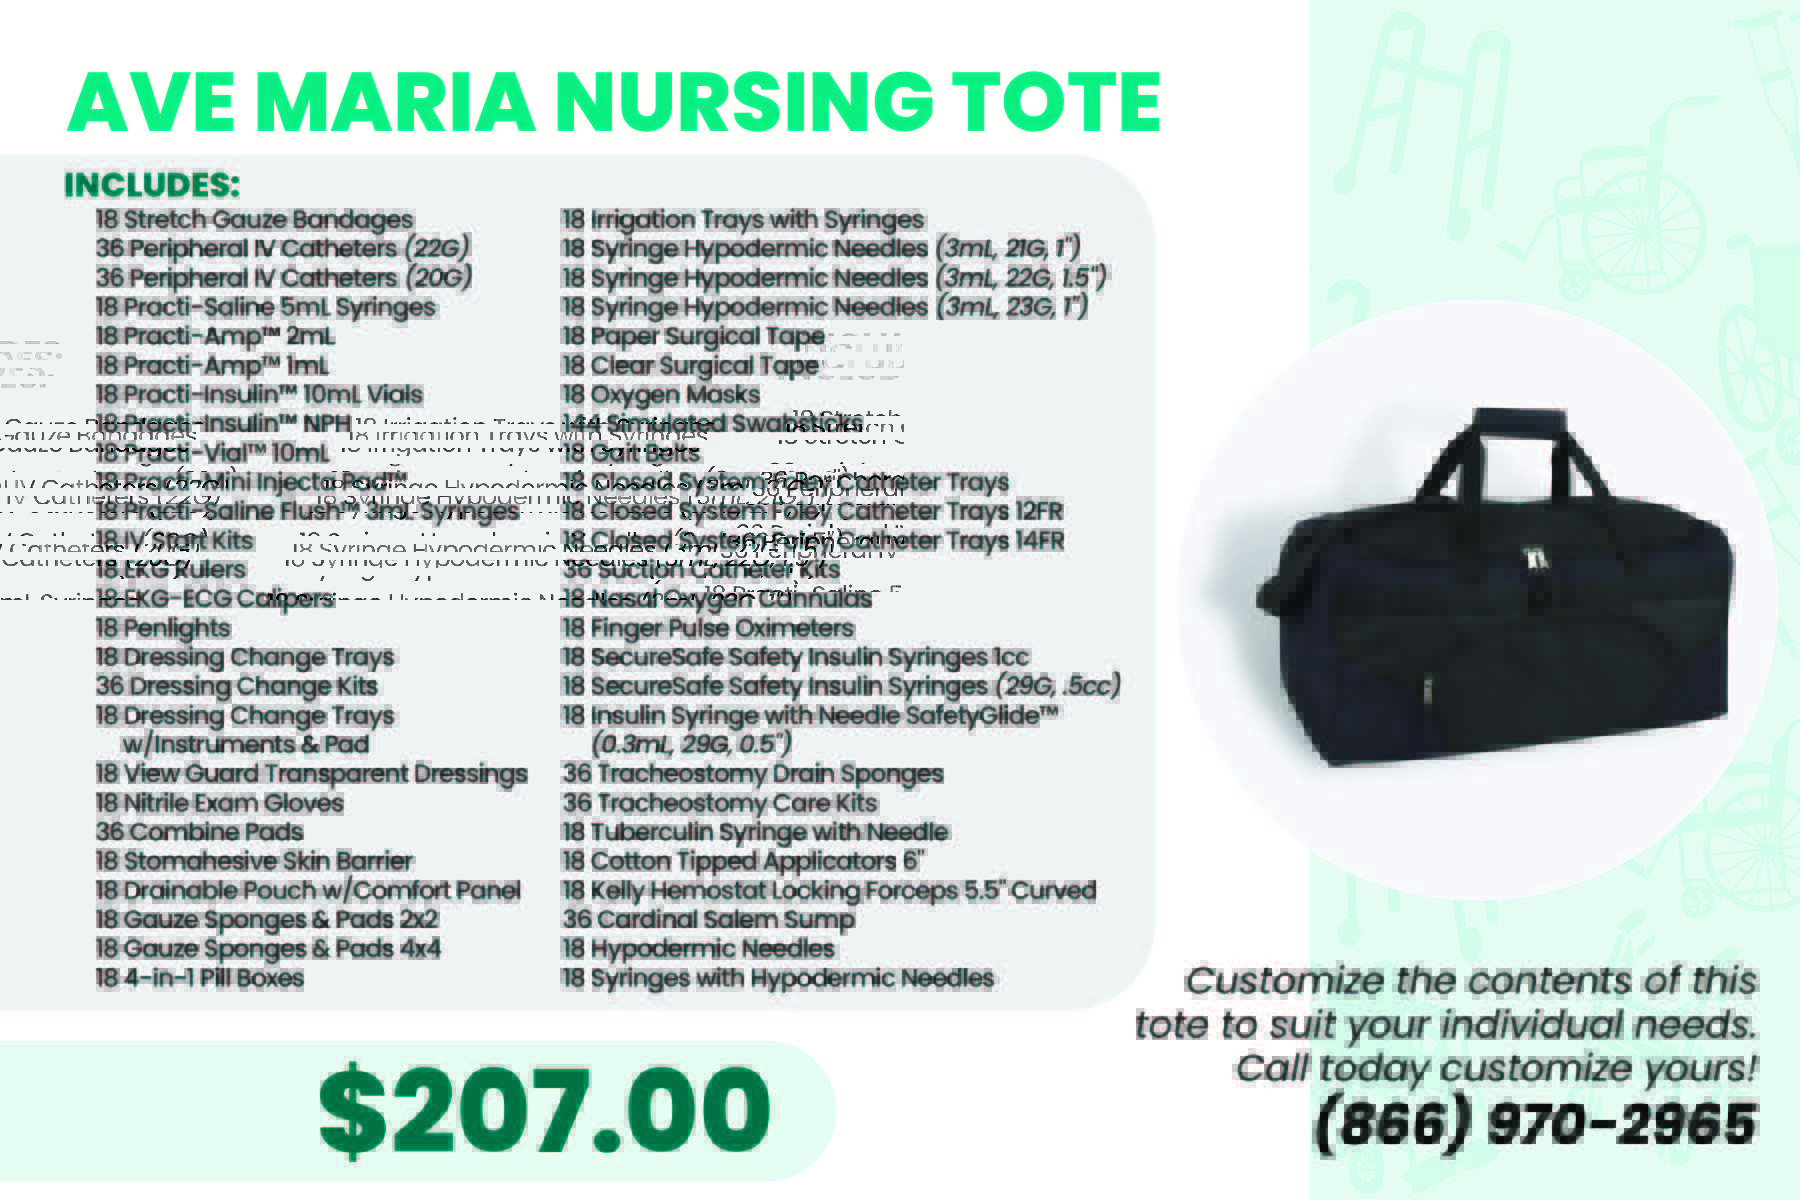 A flyer for the Ave Maria University Nursing Tote.